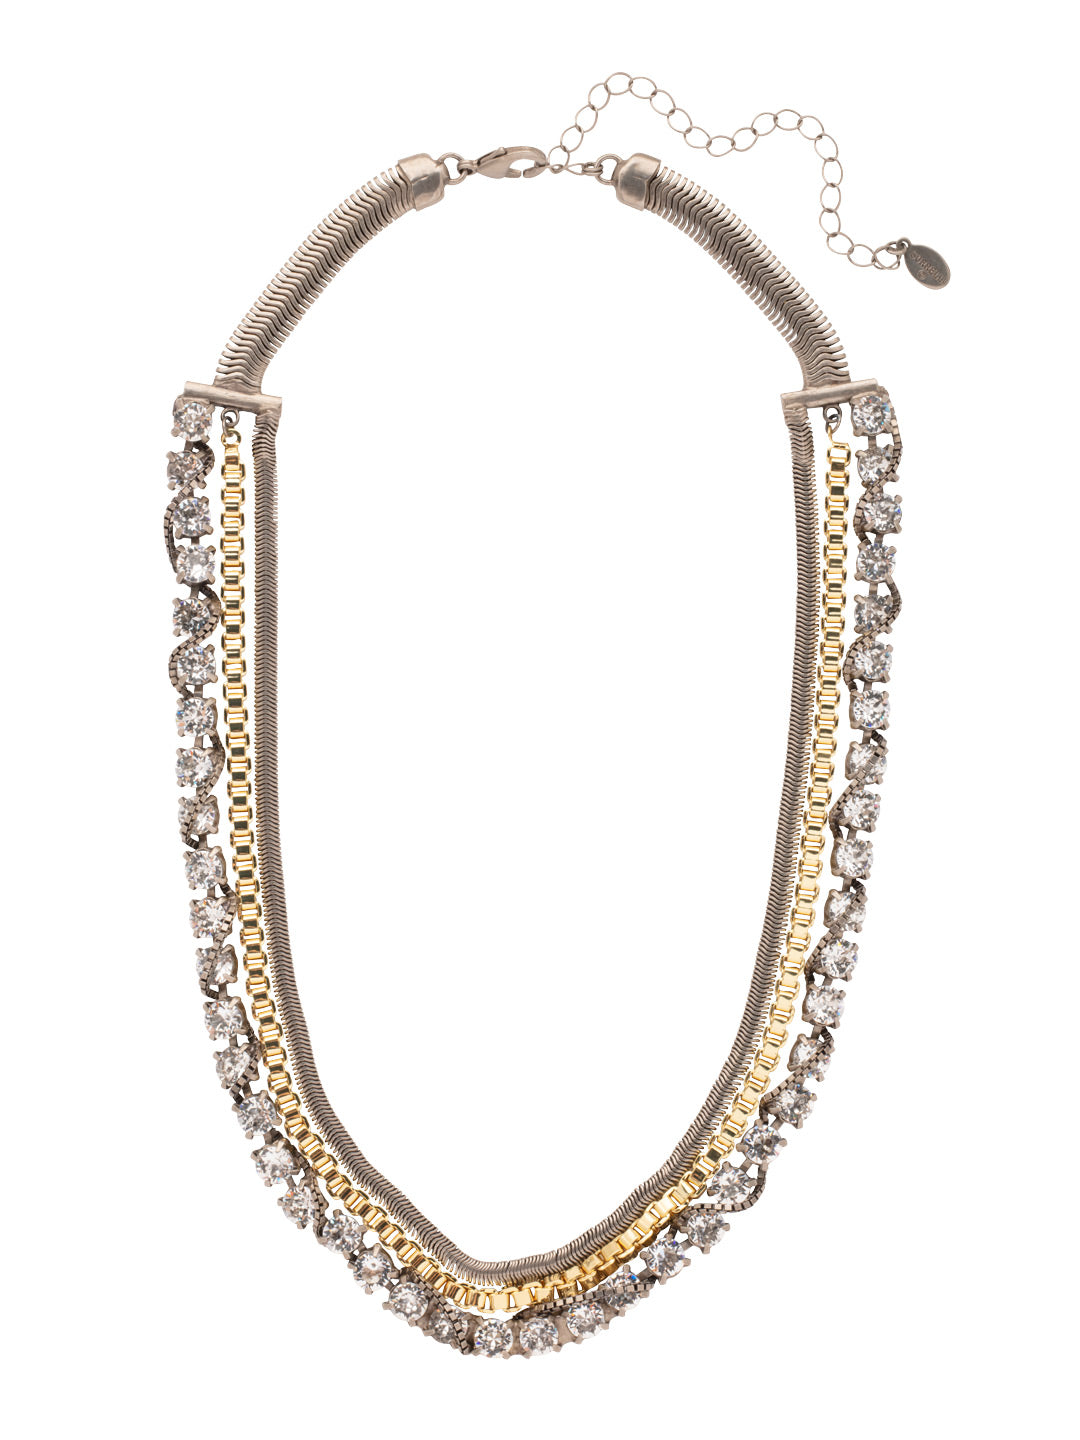 Rosie Tennis Necklace - 4NFC10MXCRY - <p>The Rosie Tennis Necklace features layers of snake chains, box chains, and braided crystal chains in mixed metal finishes. From Sorrelli's Crystal collection in our Mixed Metal finish.</p>